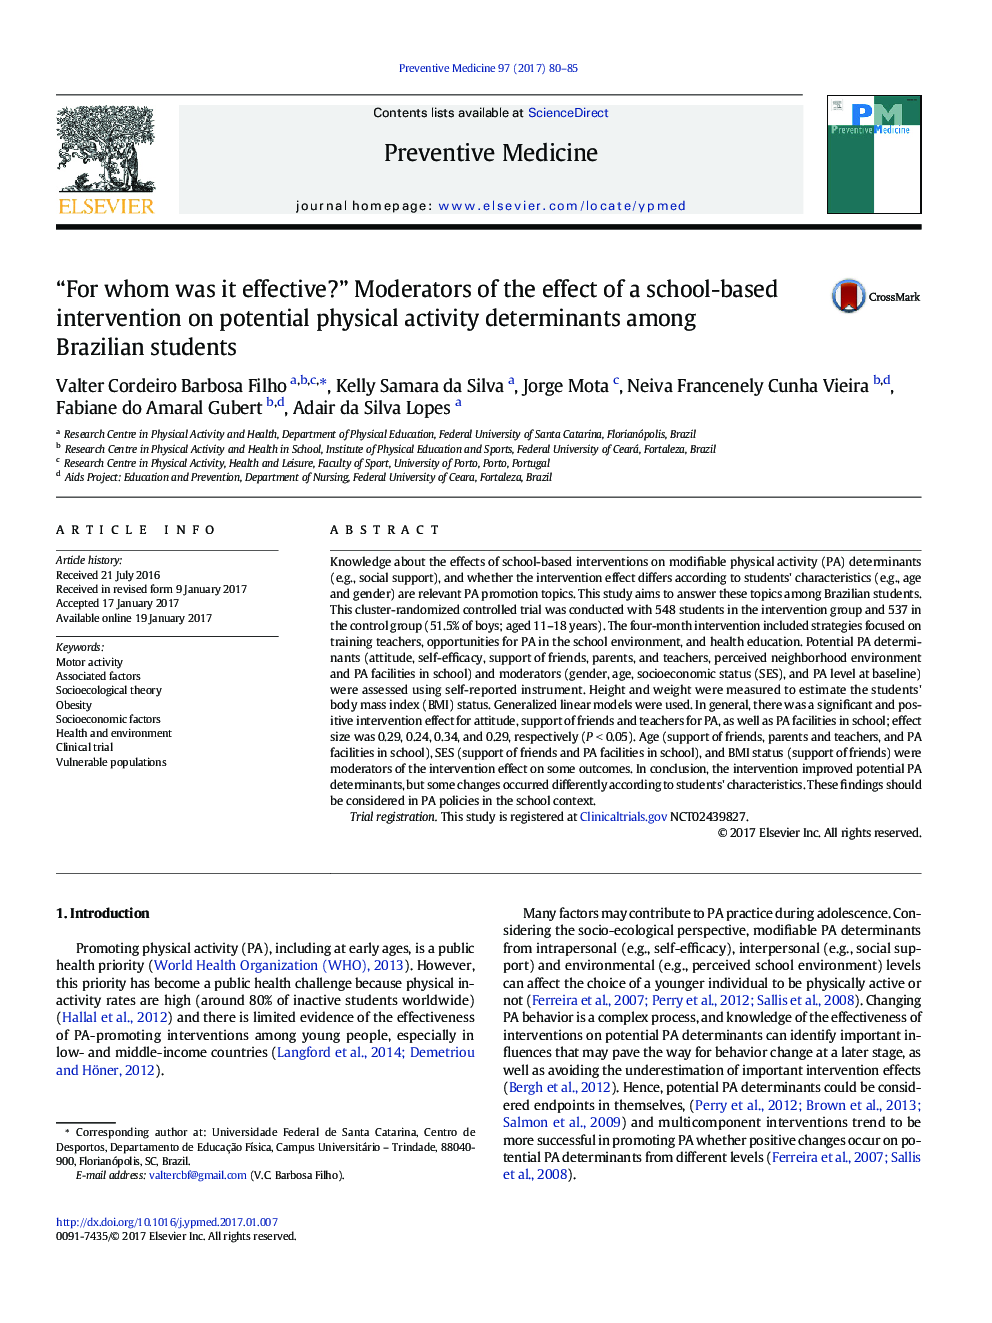 “For whom was it effective?” Moderators of the effect of a school-based intervention on potential physical activity determinants among Brazilian students